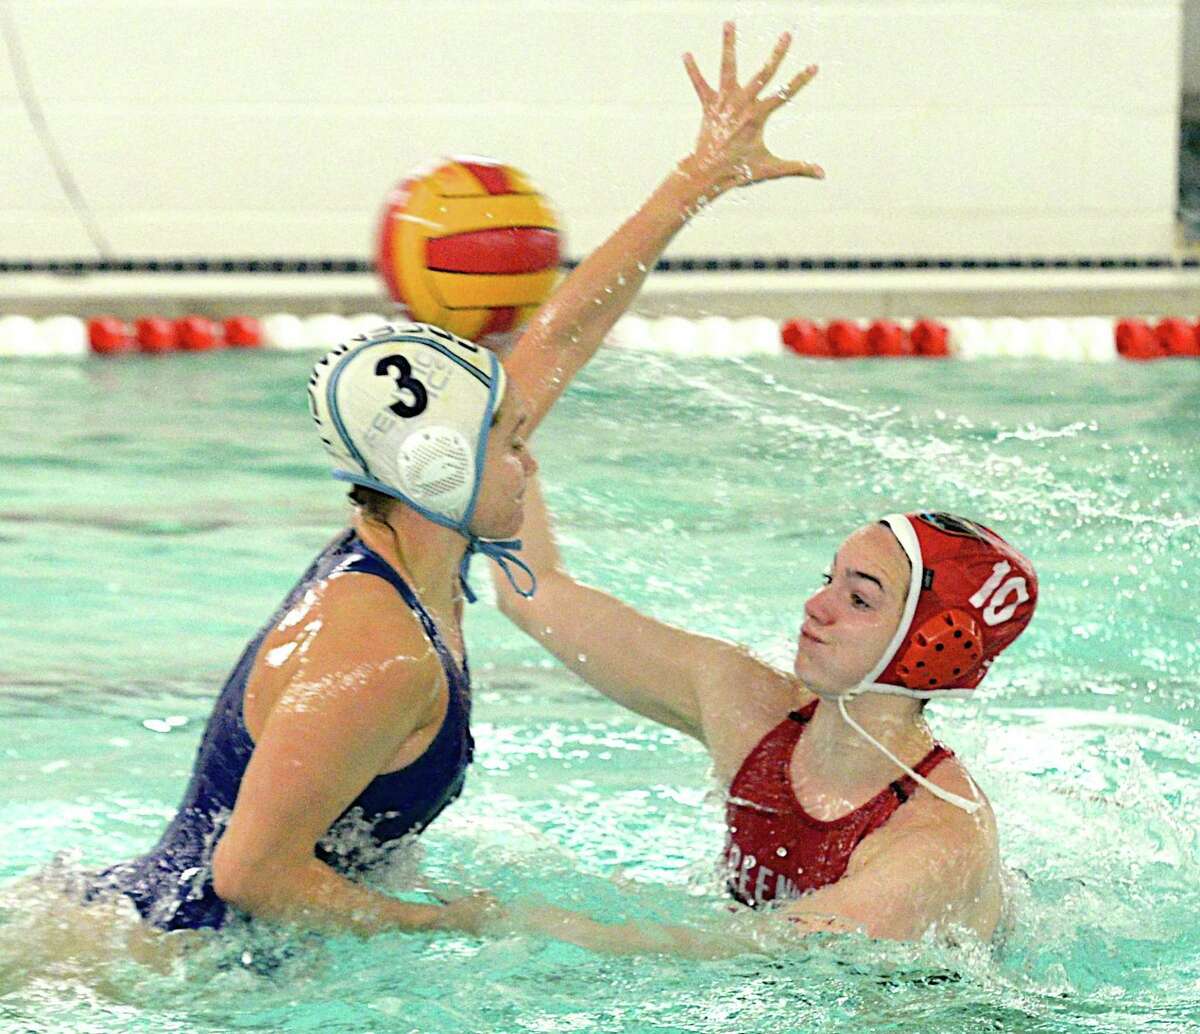 In this May 12 file photo, Greenwich’s Annie Robinson, right, looks to pass the ball while being defended by Ally Furano of Greenwich Aquatics.